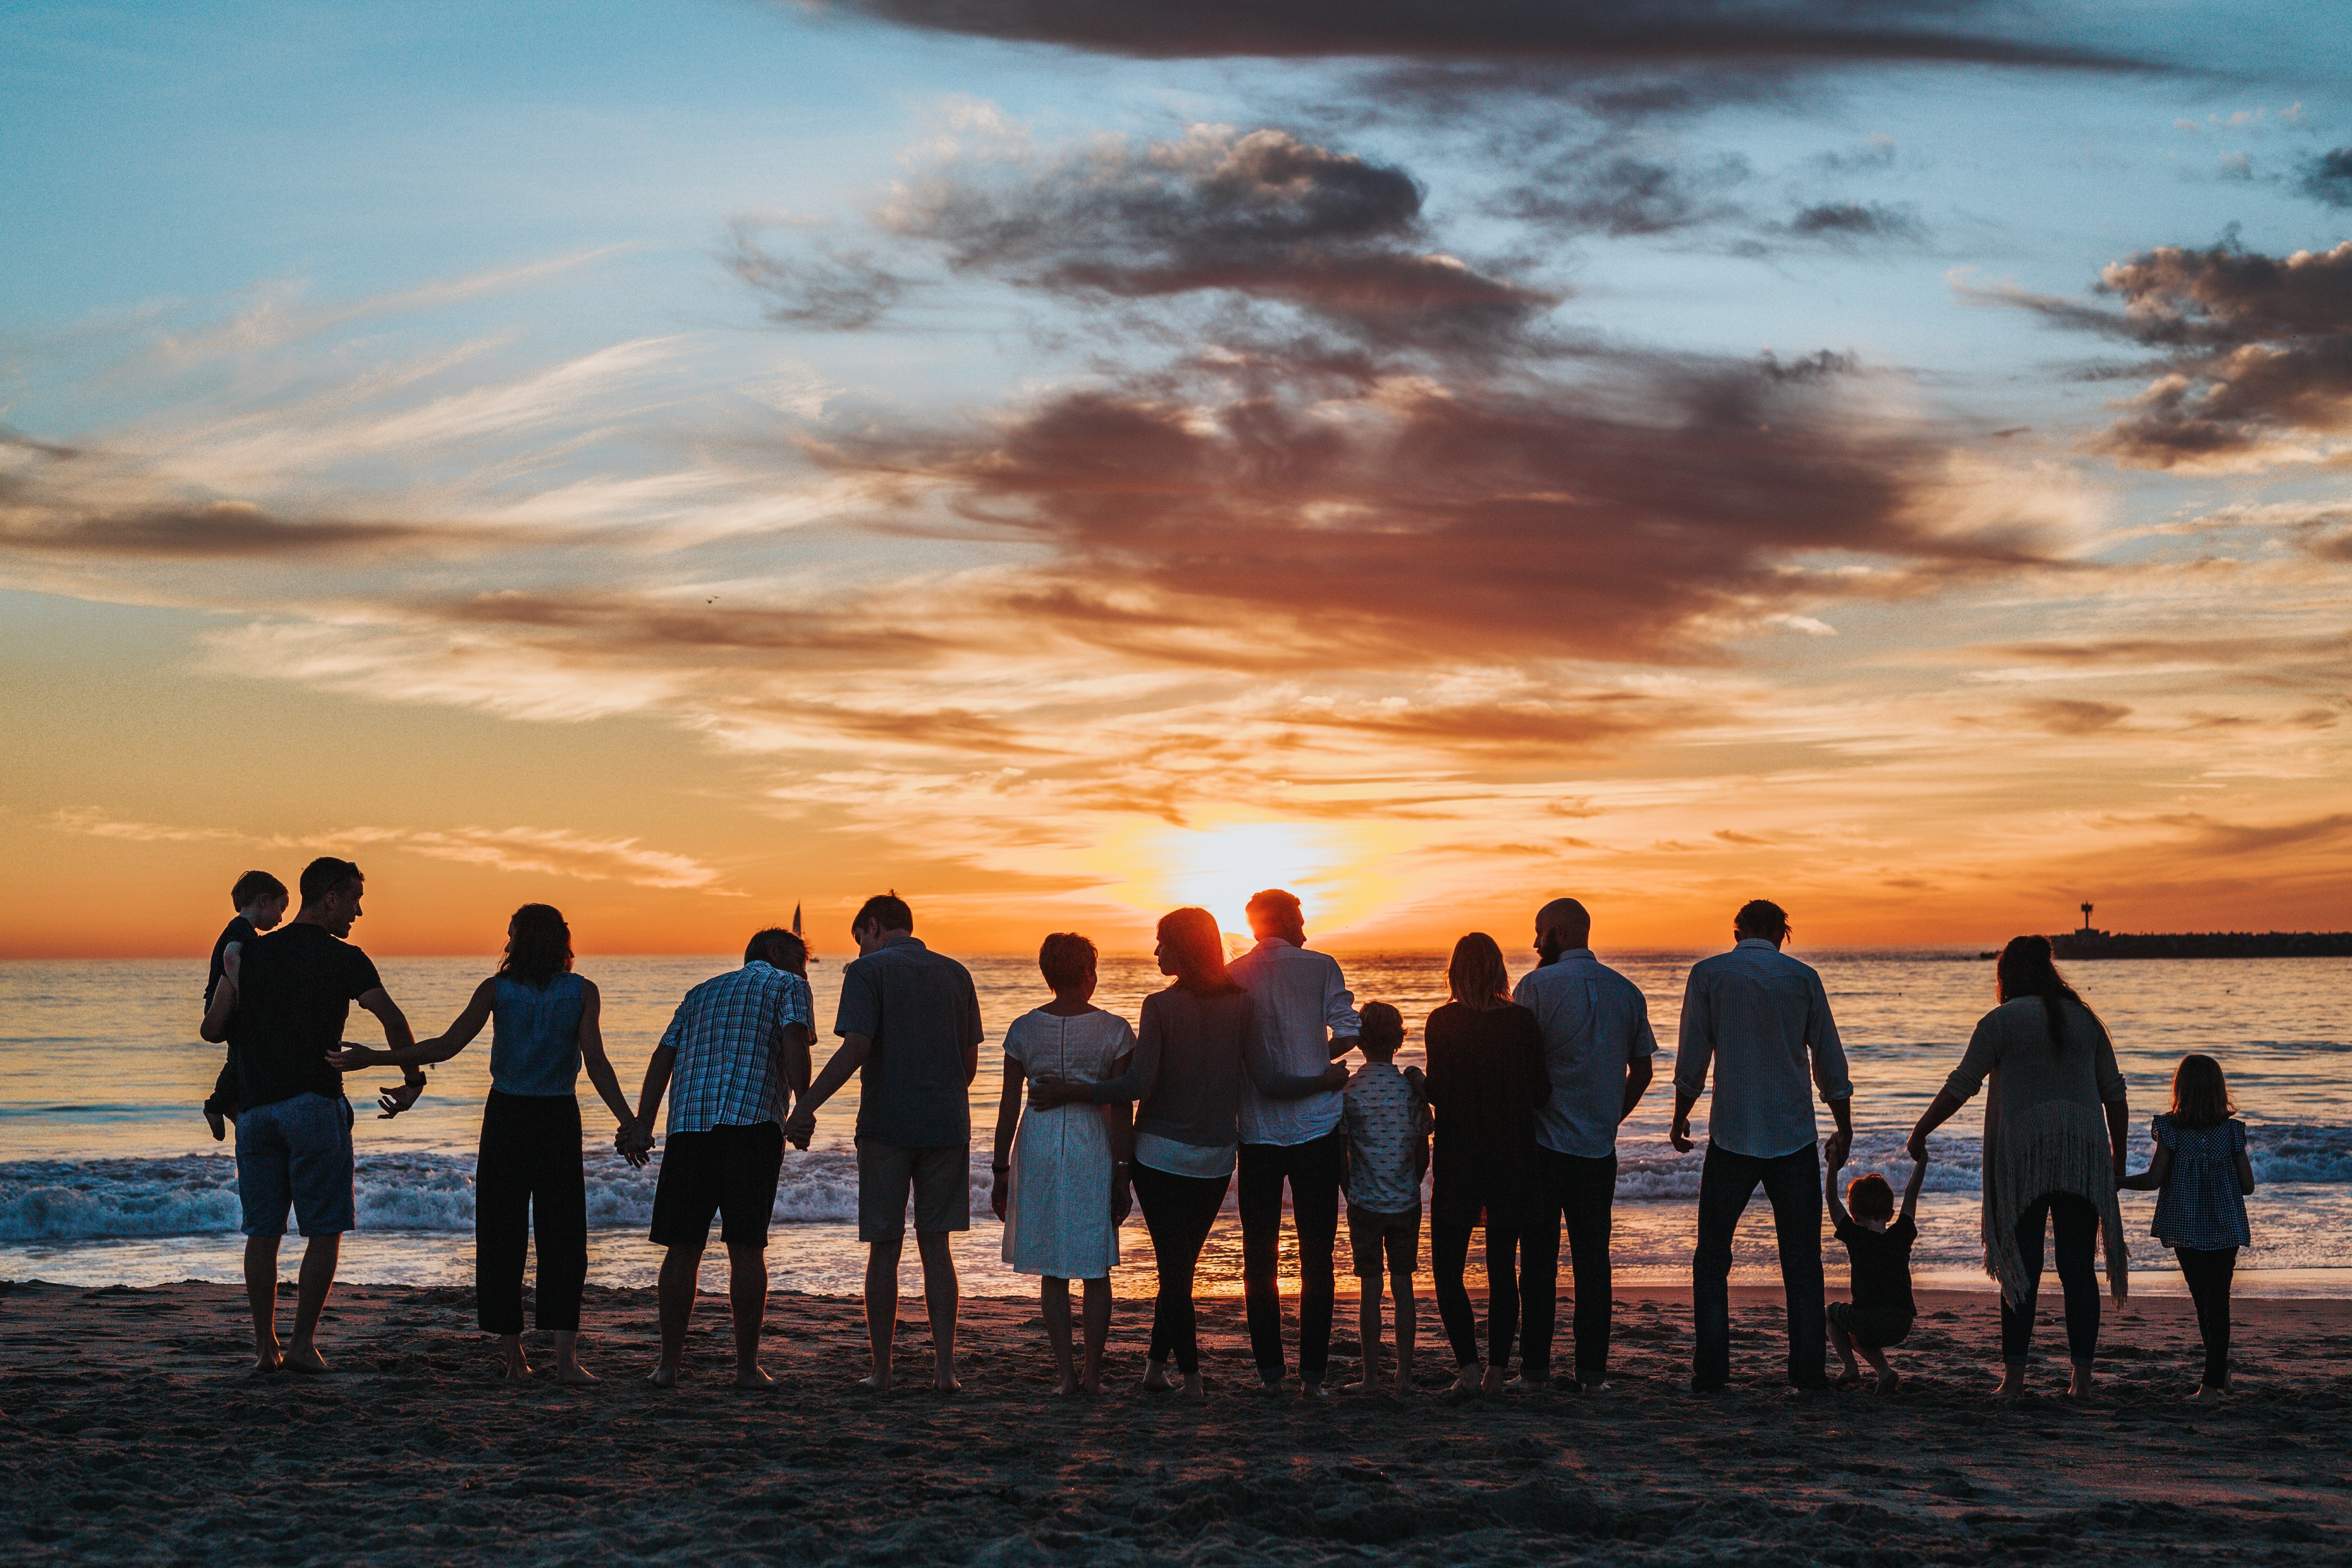 Patrick found the big family he'd always dreamed of. | Source: Unsplash